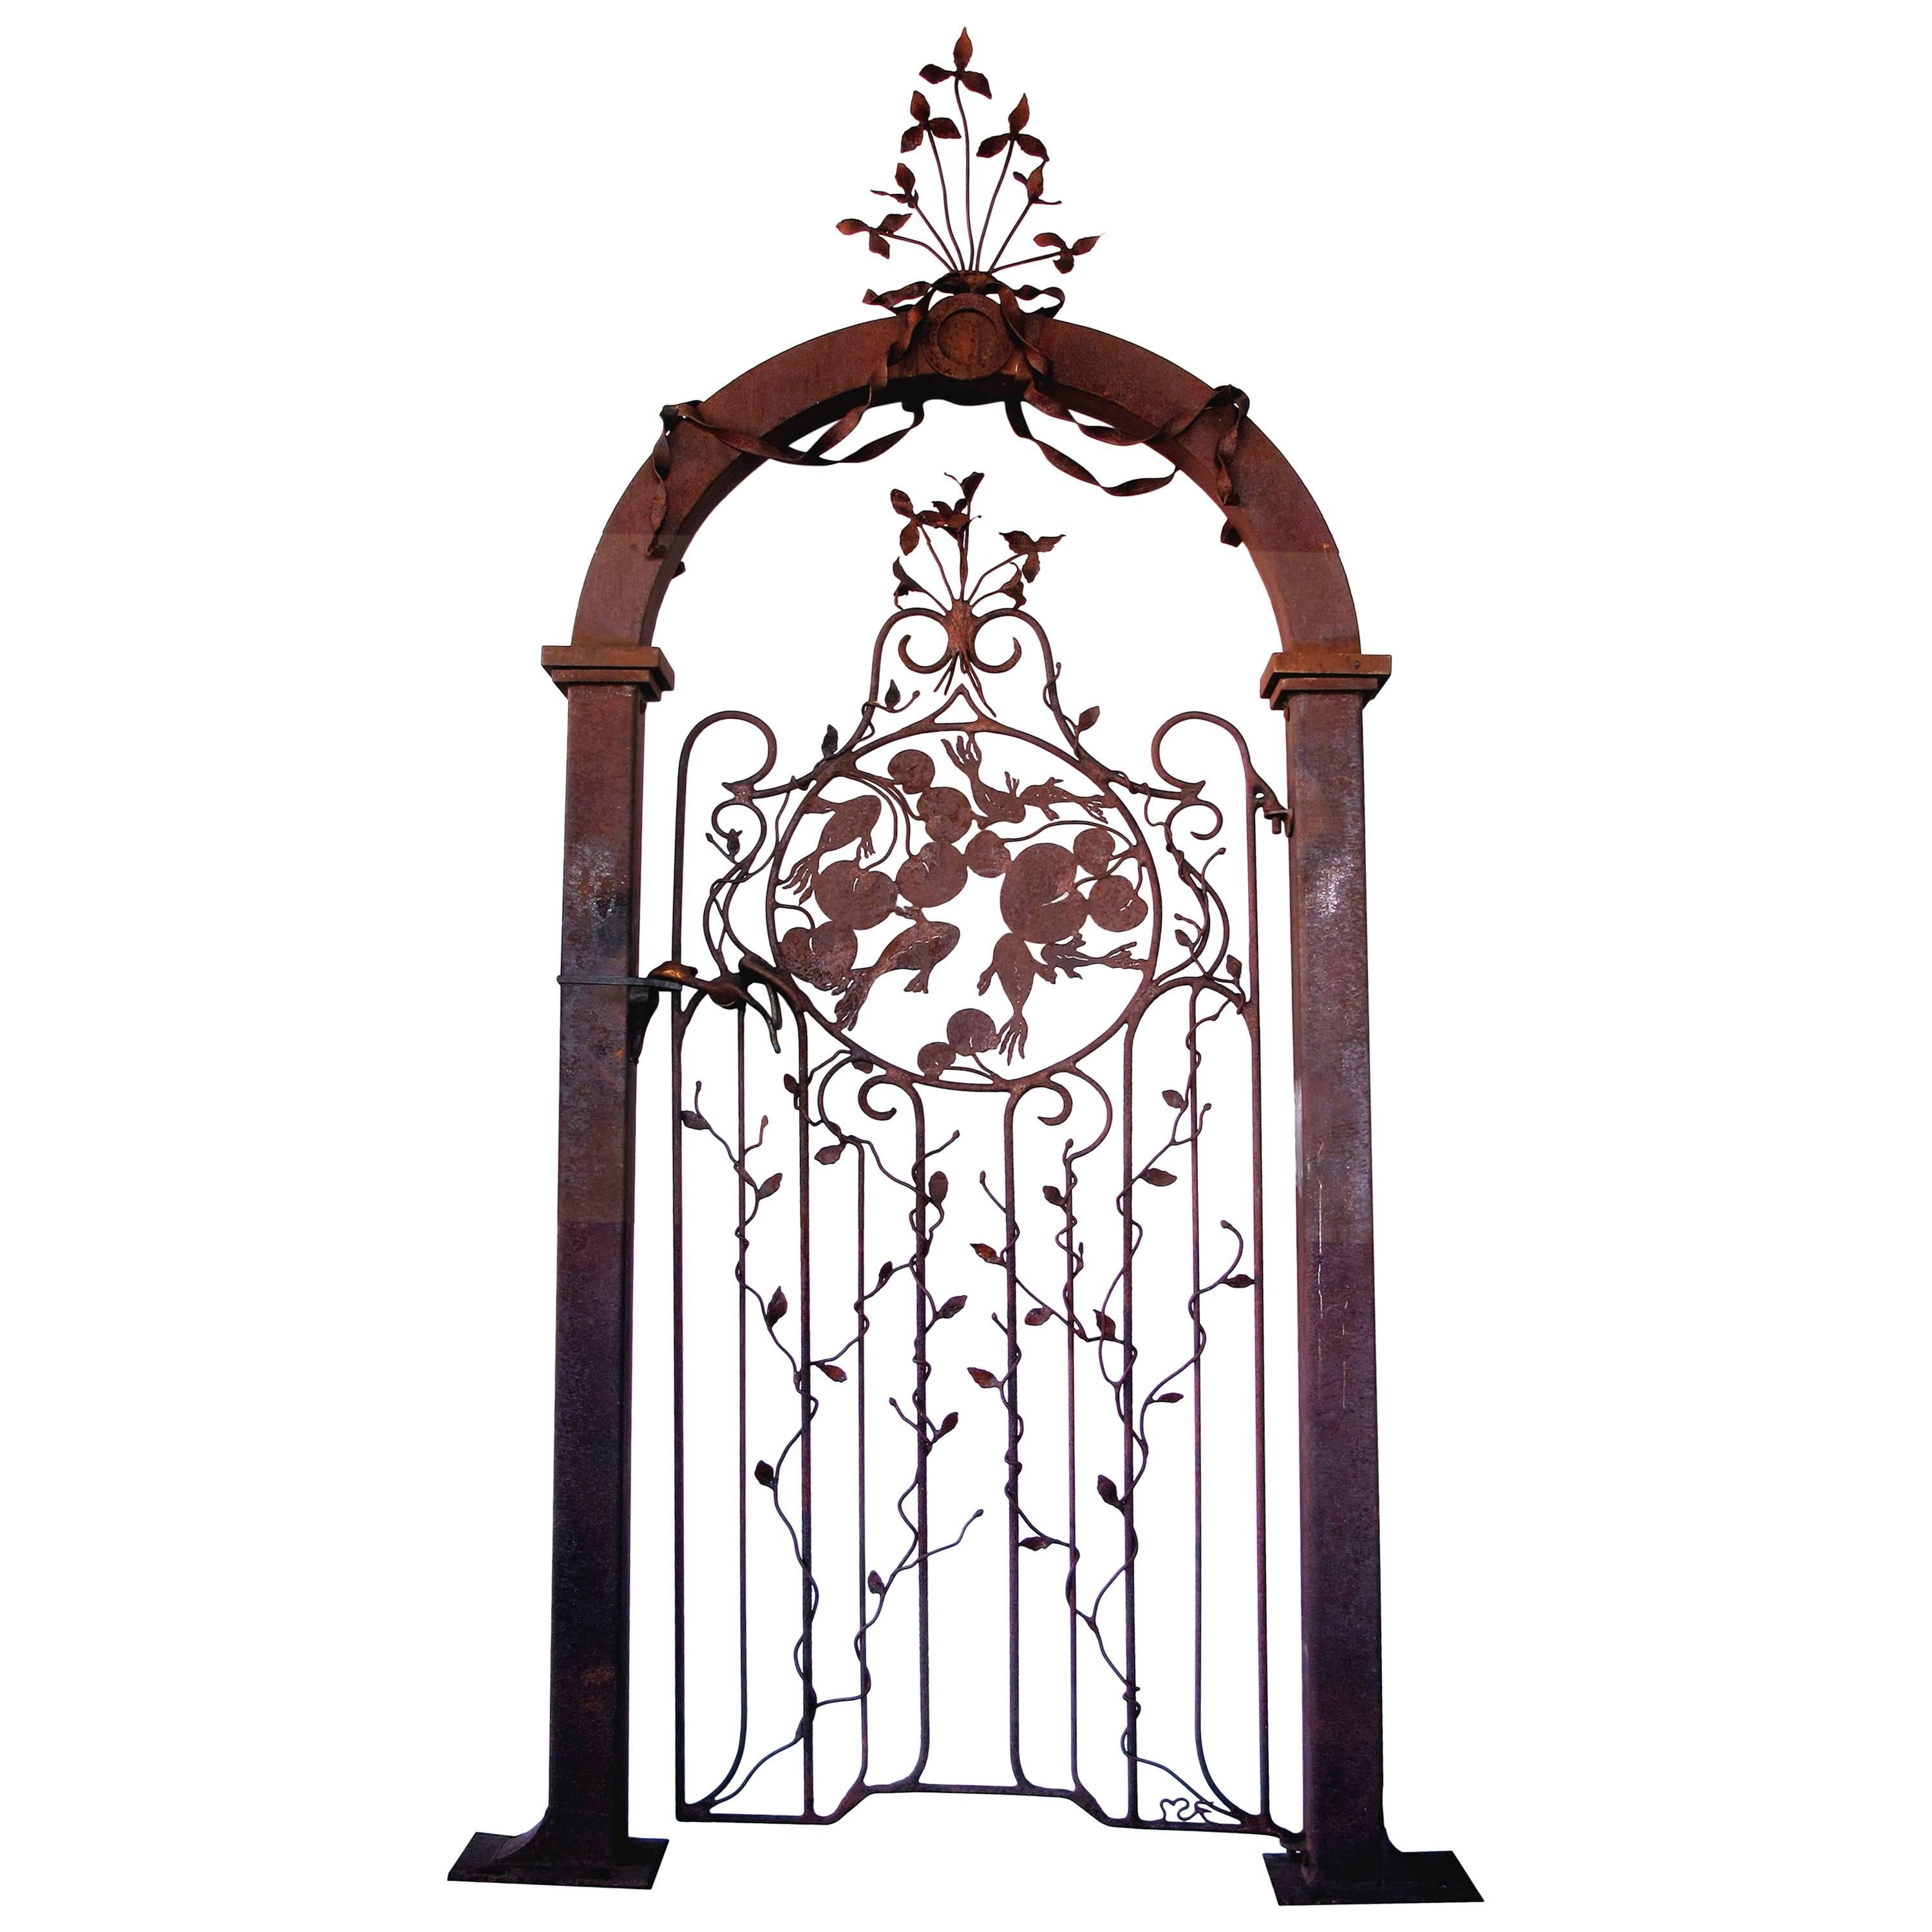 Well-Crafted Custom-Made Wrought Iron Gate W Foliate Vines and Swimming Fish